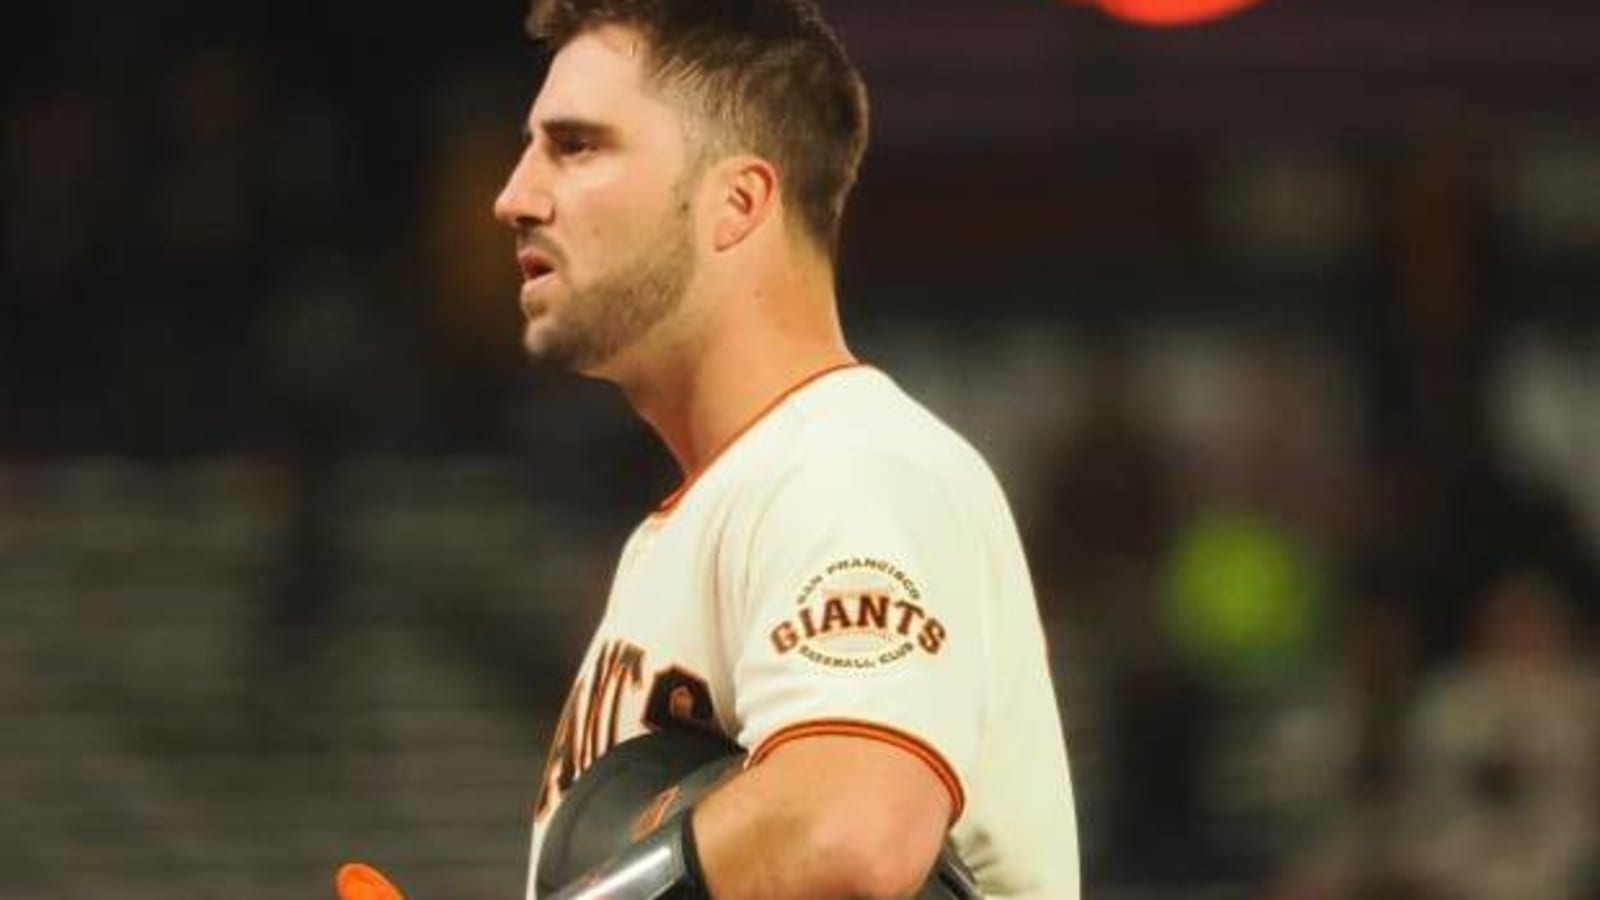 5 most likely landing spots for  Giants catcher Joey Bart